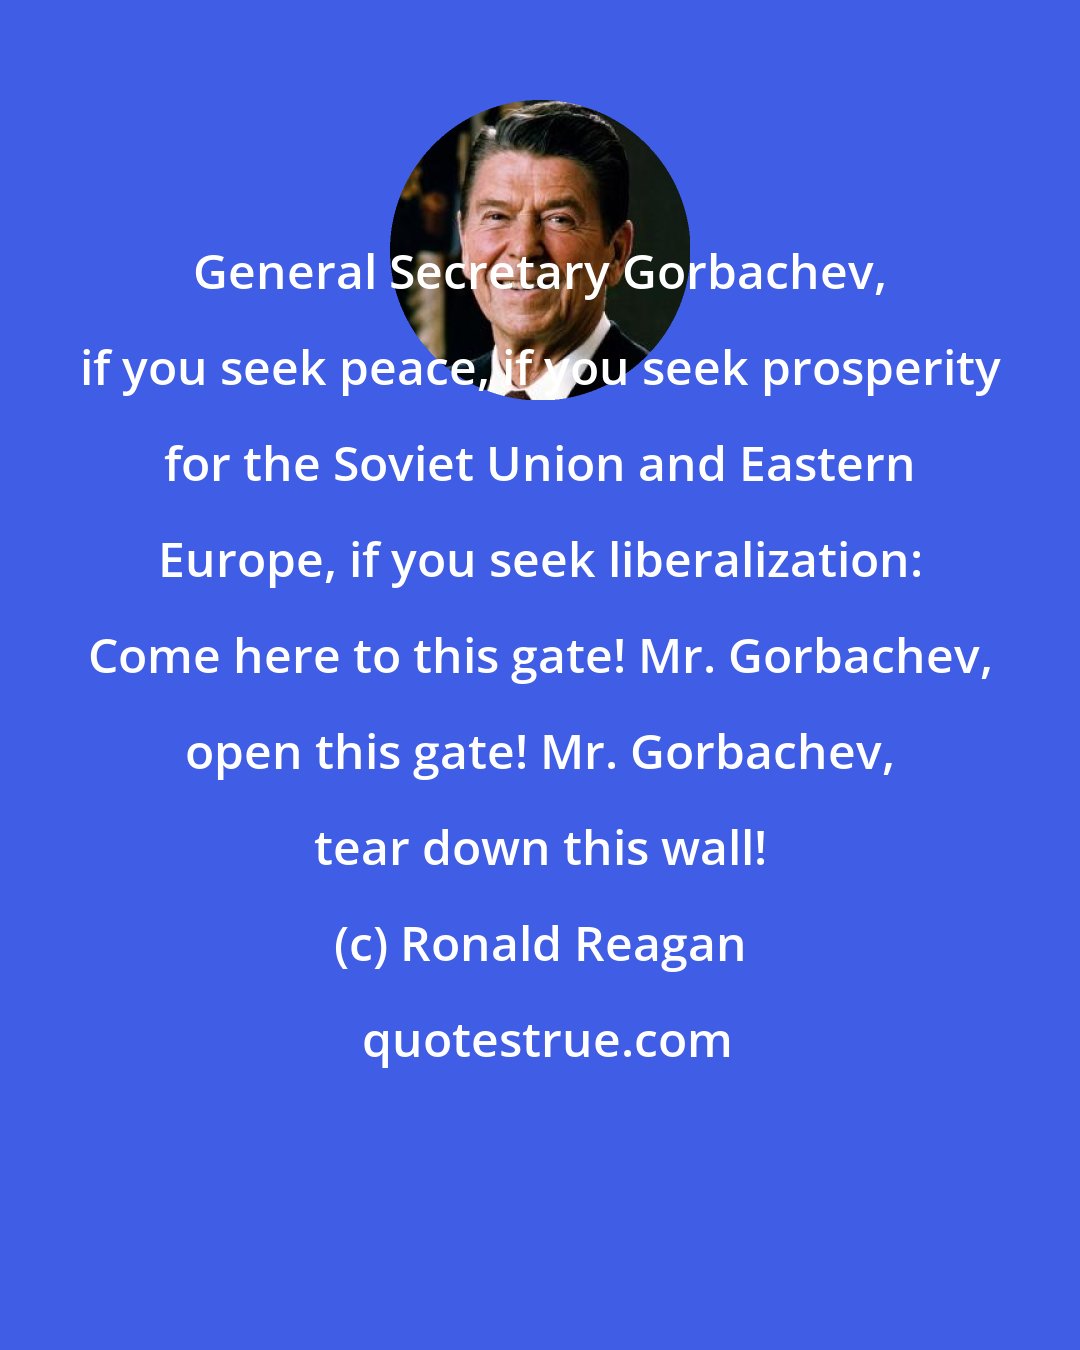 Ronald Reagan: General Secretary Gorbachev, if you seek peace, if you seek prosperity for the Soviet Union and Eastern Europe, if you seek liberalization: Come here to this gate! Mr. Gorbachev, open this gate! Mr. Gorbachev, tear down this wall!